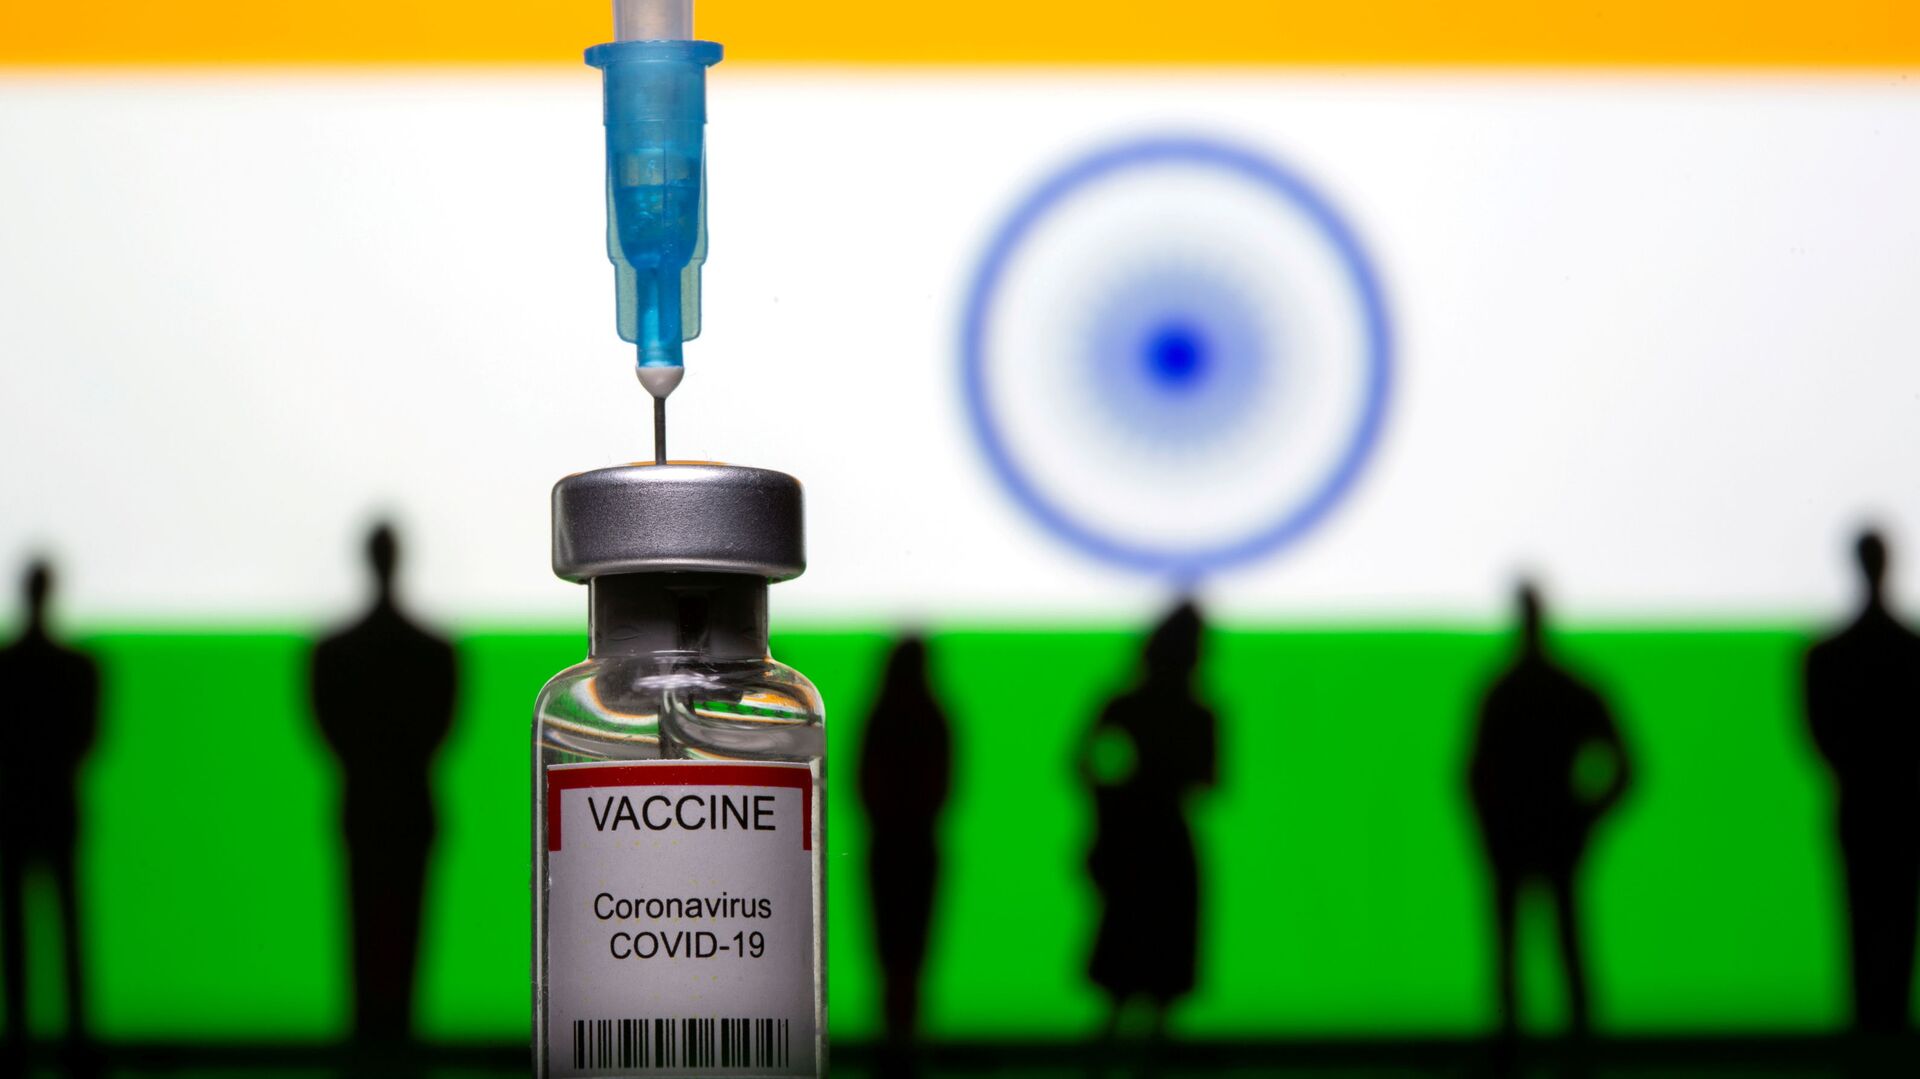 3D-printed small toy figurines, a syringe and vial labelled coronavirus disease (COVID-19) vaccine are seen in front of India flag - Sputnik International, 1920, 04.10.2021